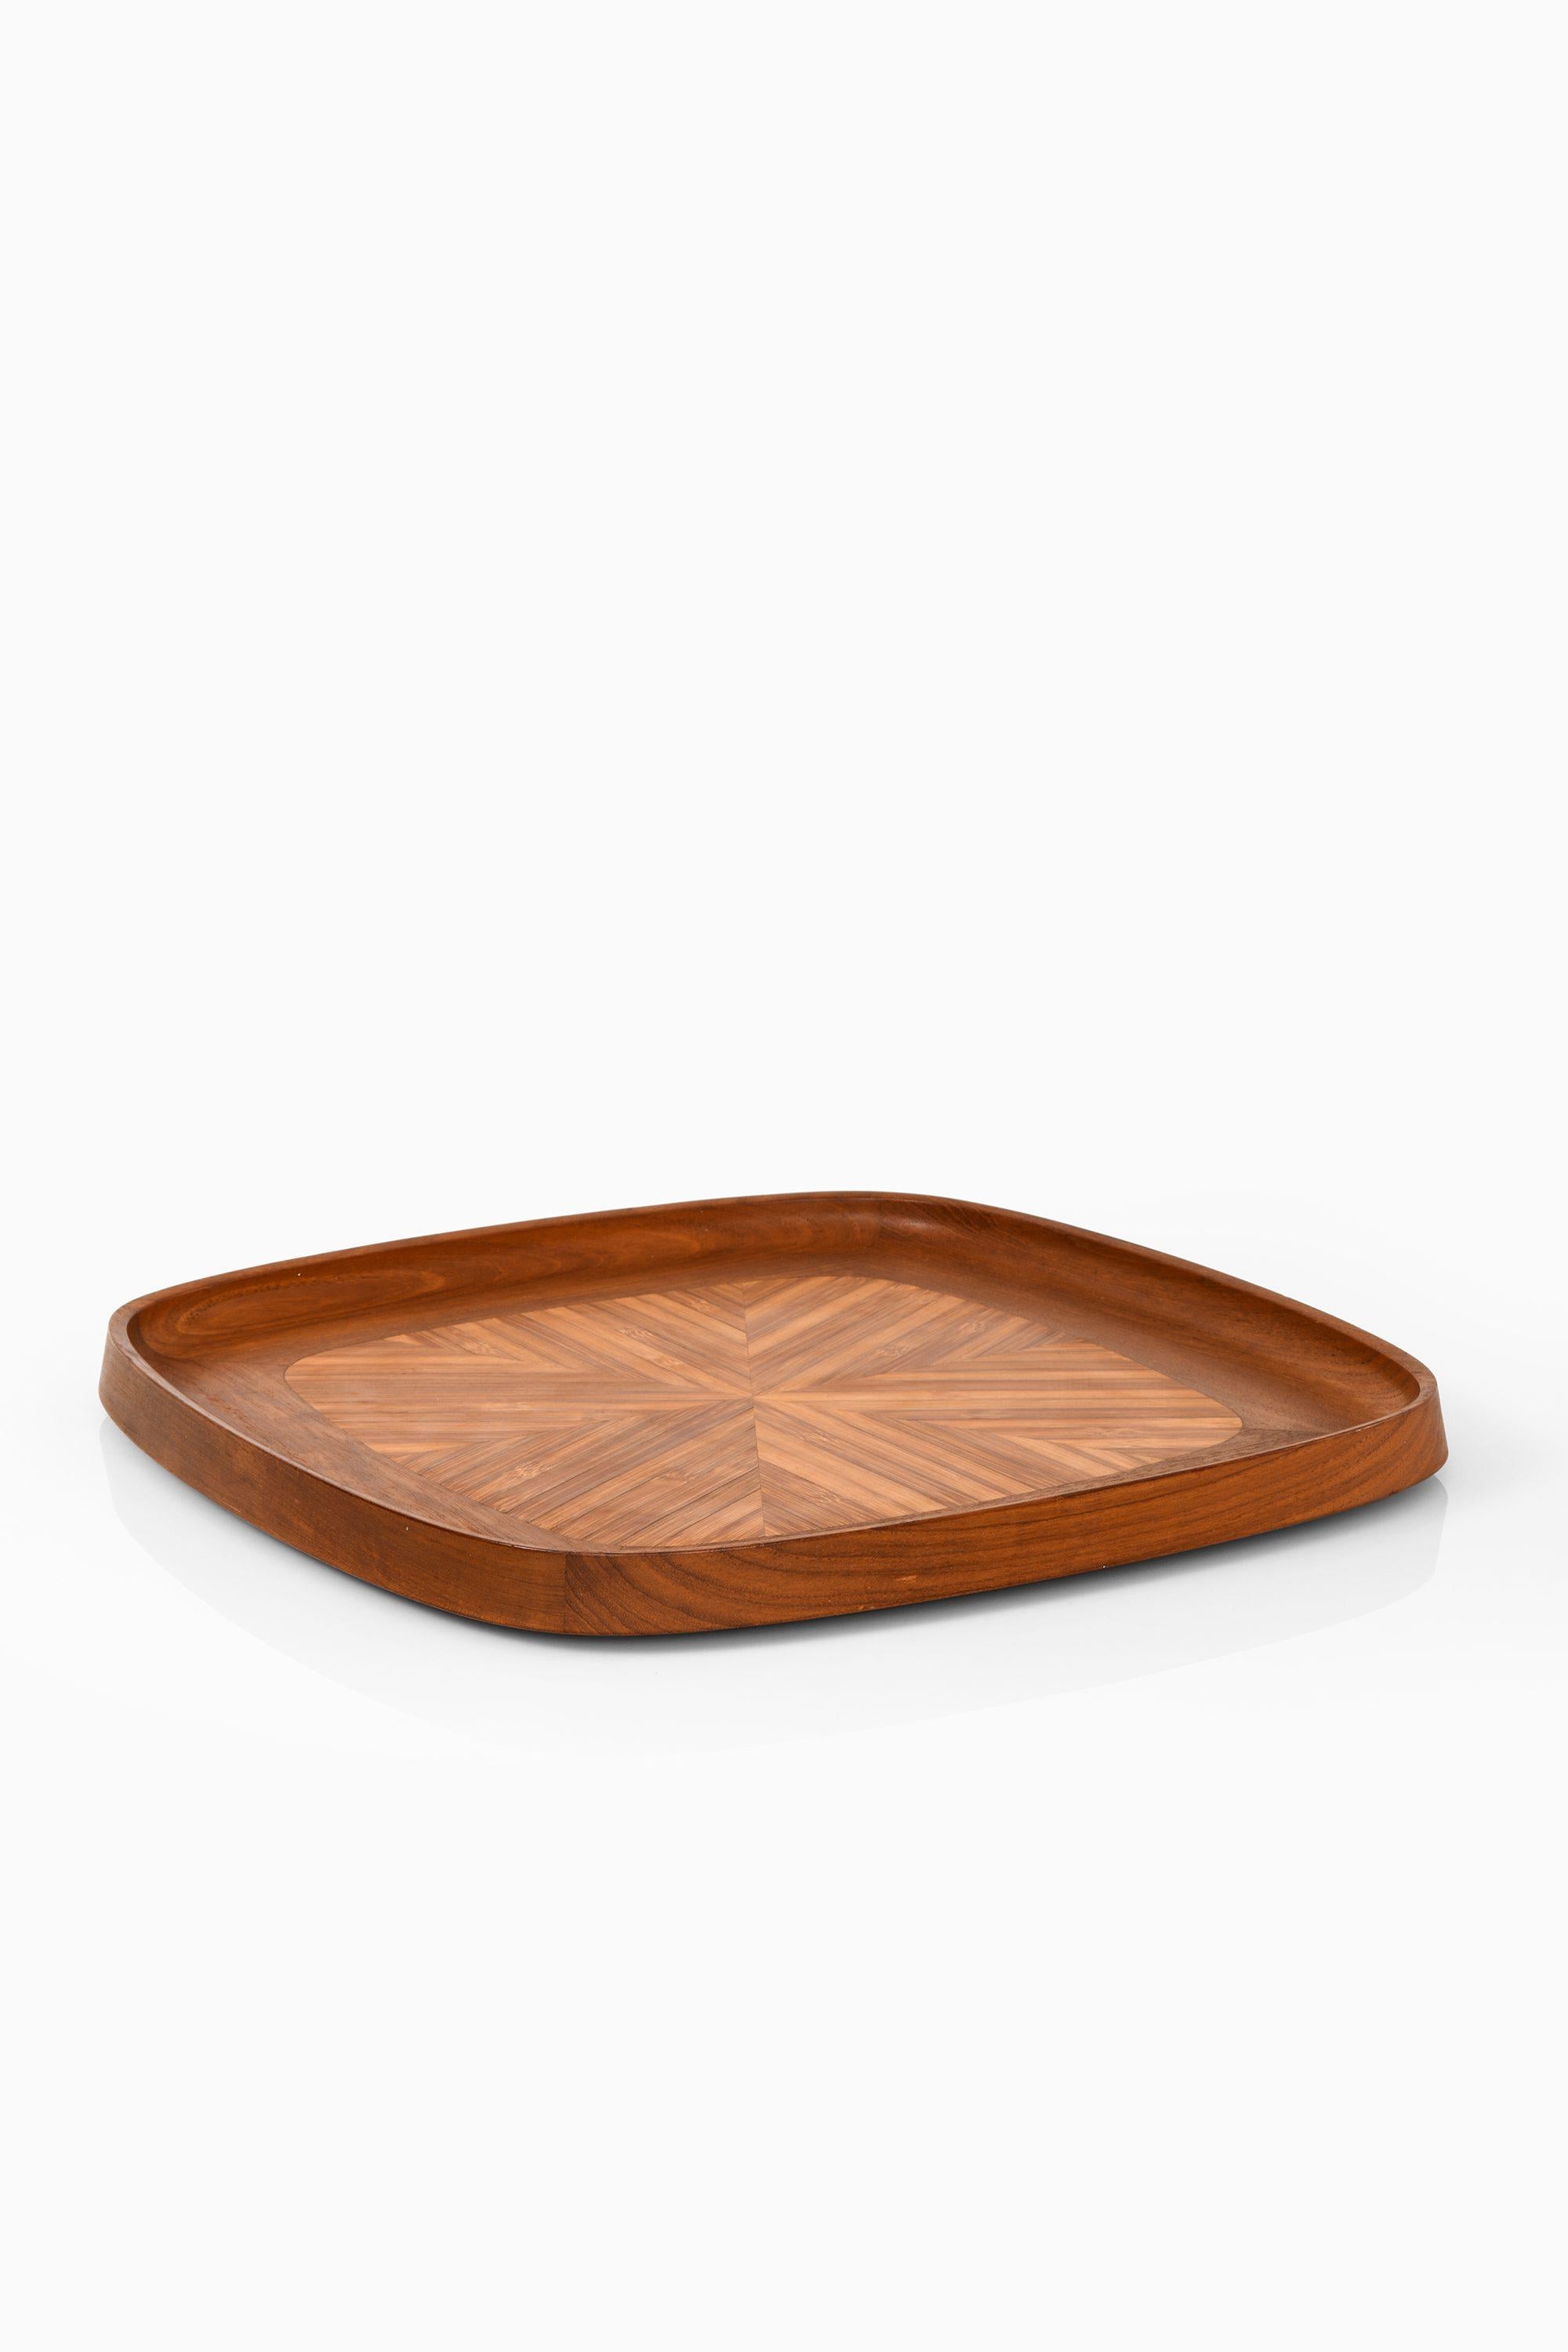 Scandinavian Modern Serving Tray in Teak and Bamboo by Jens Quistgaard, 1950's For Sale